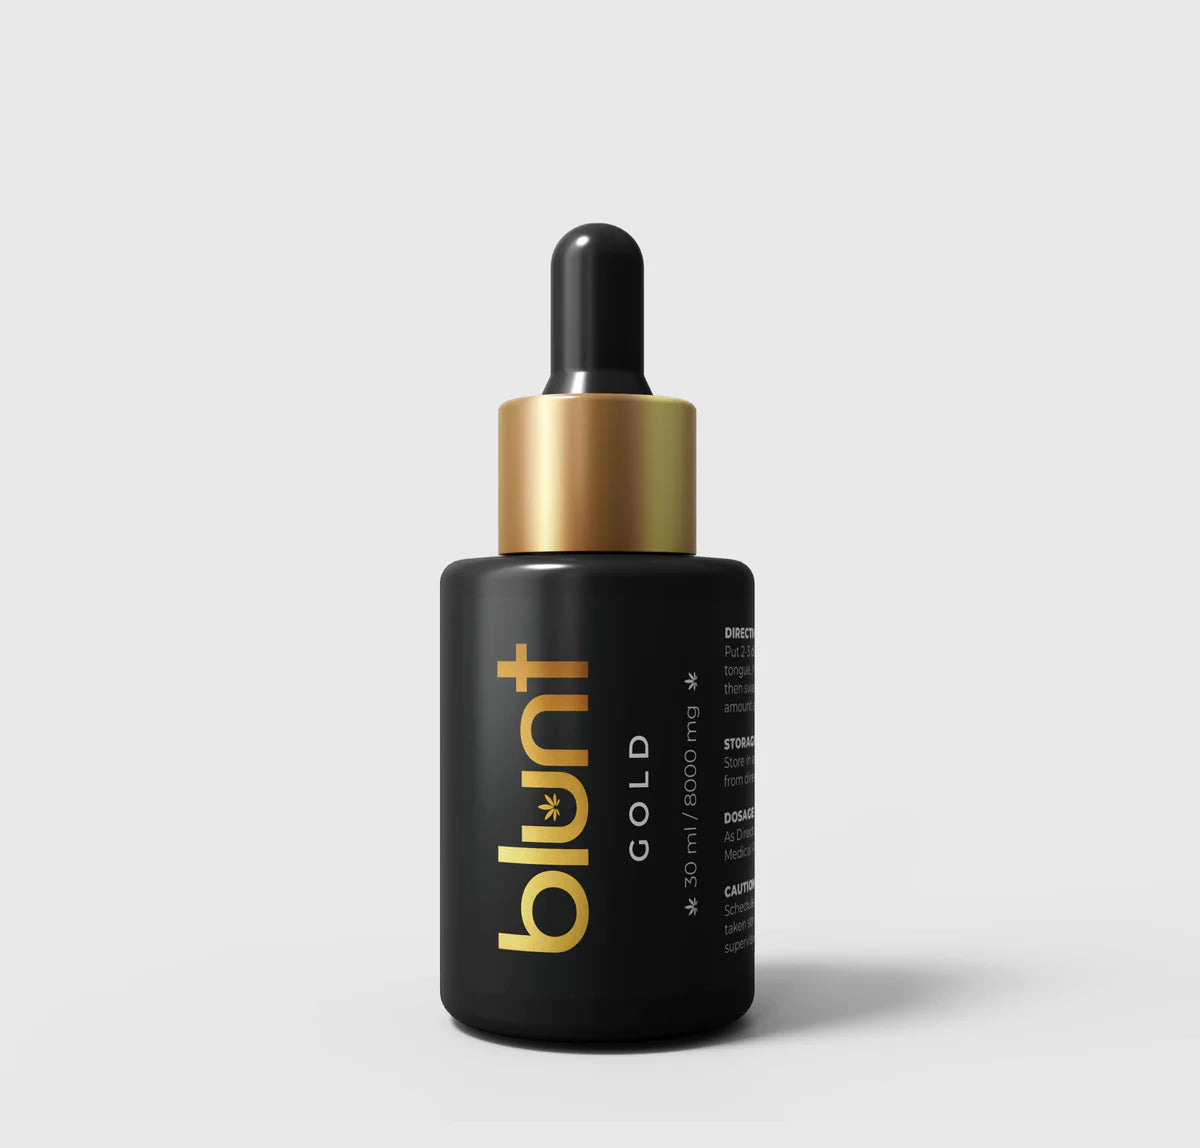 Blunt Gold+++ 8000mg 1:7(CBD:THC) - for Mental & Physical Wellness